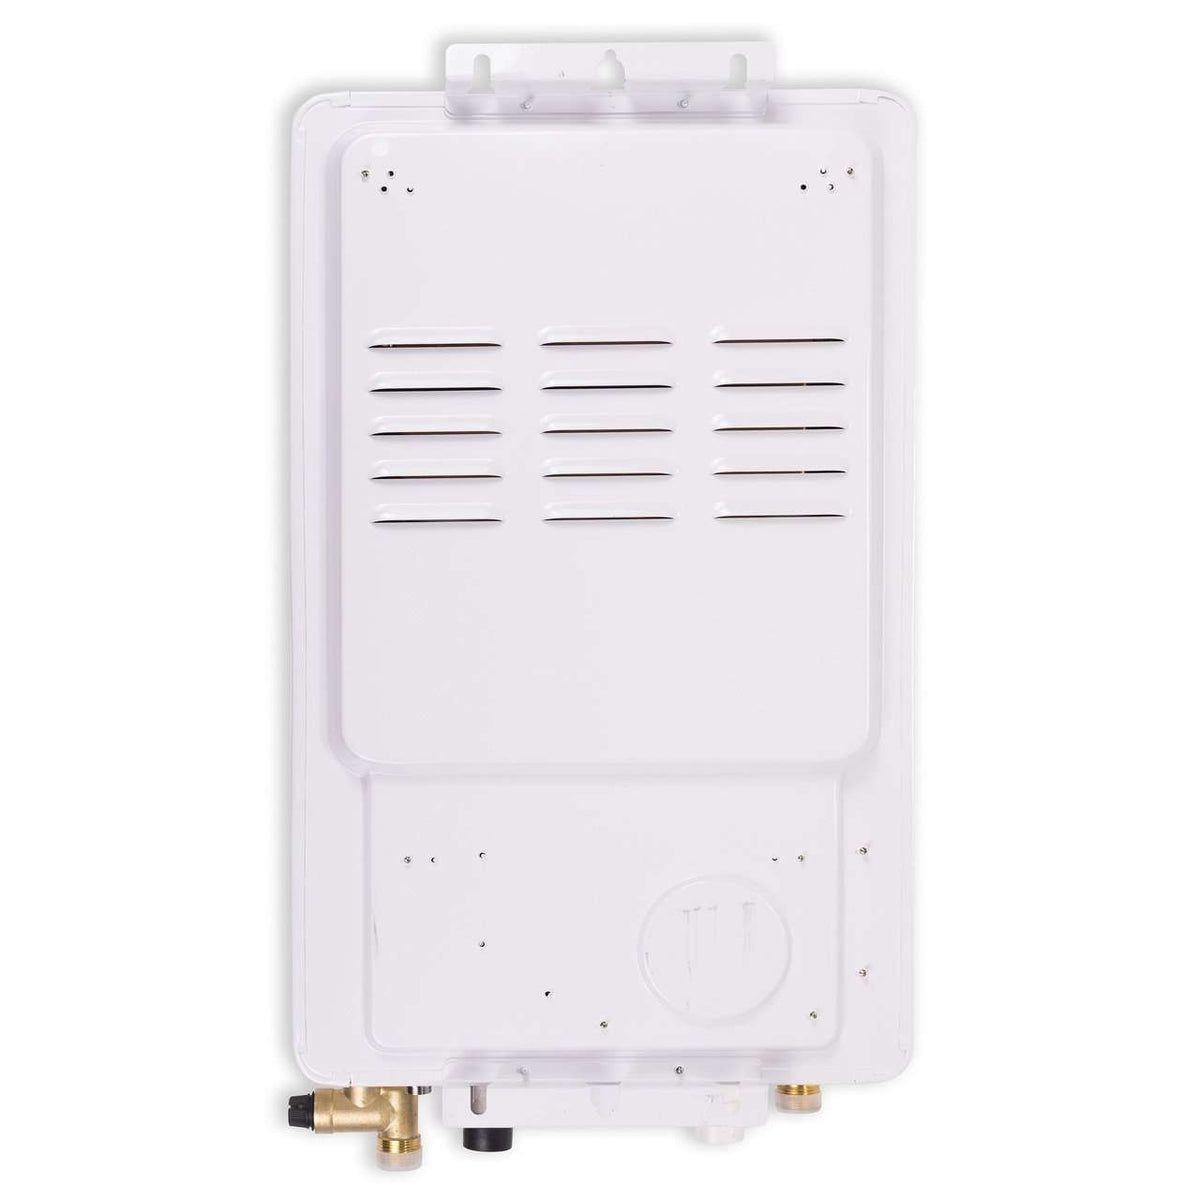 Eccotemp 45H-NG 6.8 GPM Outdoor Natural Gas Tankless Water Heater Manufacturer RFB